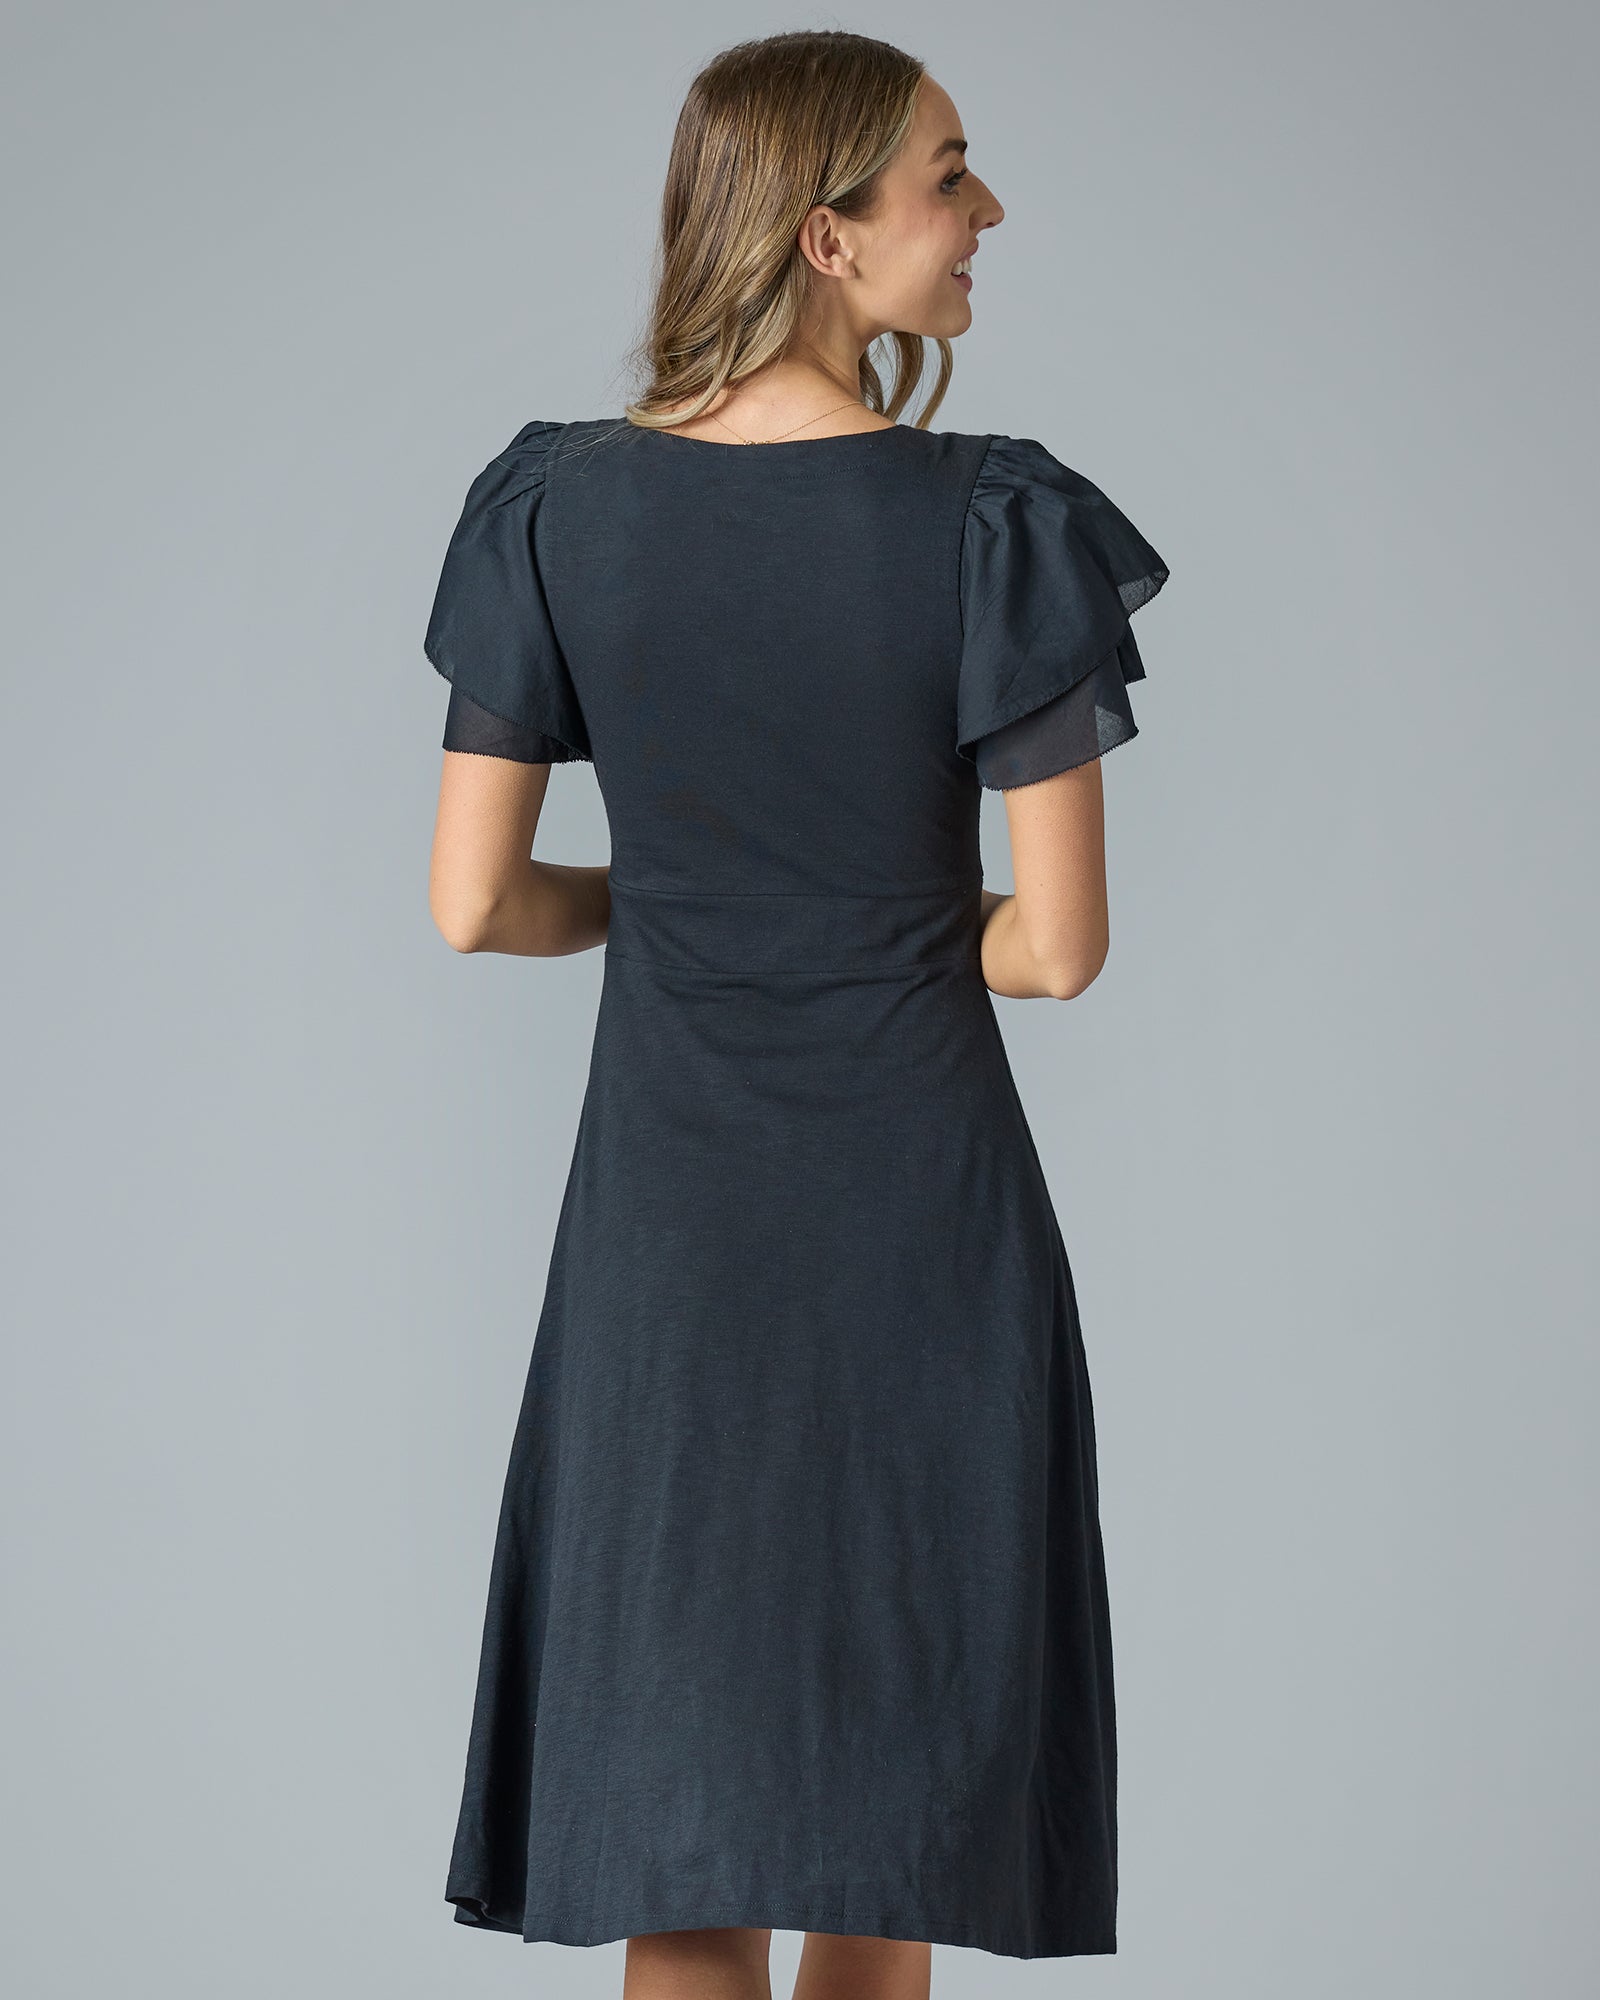 Woman in a black midi-length dress with ruffle short sleeves